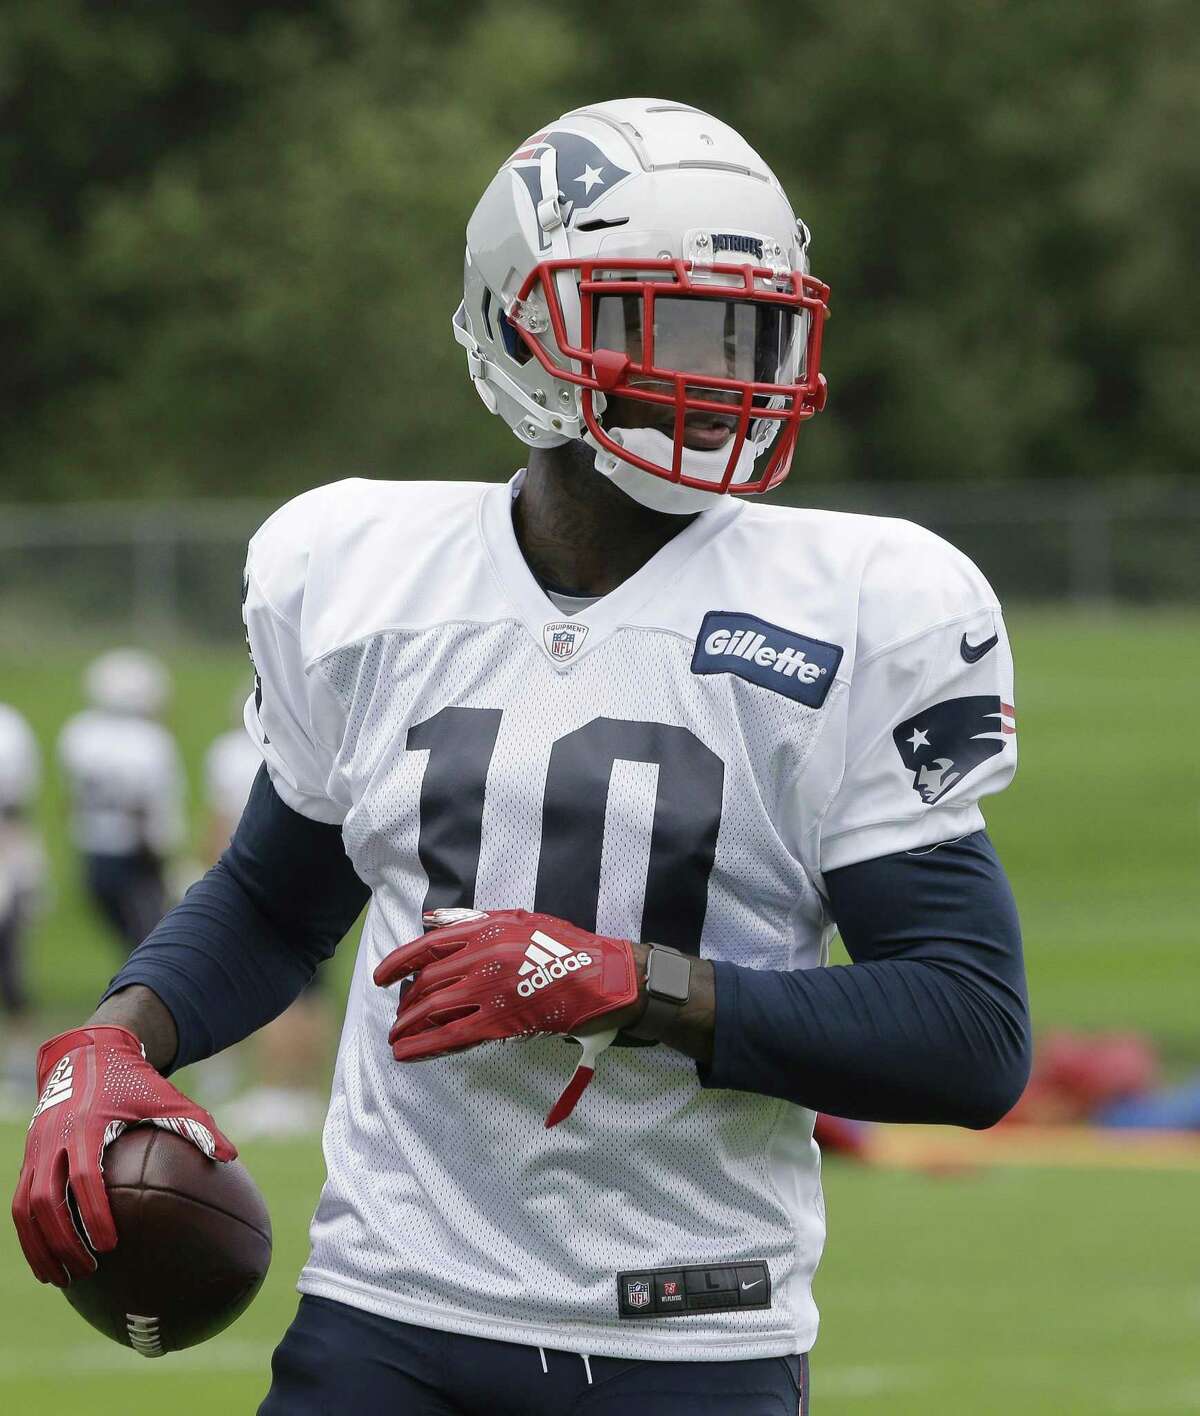 New England Patriots wide receiver Josh Gordon holds the ball during an NFL football practice, Wednesday, Sept. 19, 2018, in Foxborough, Mass. (AP Photo/Steven Senne)